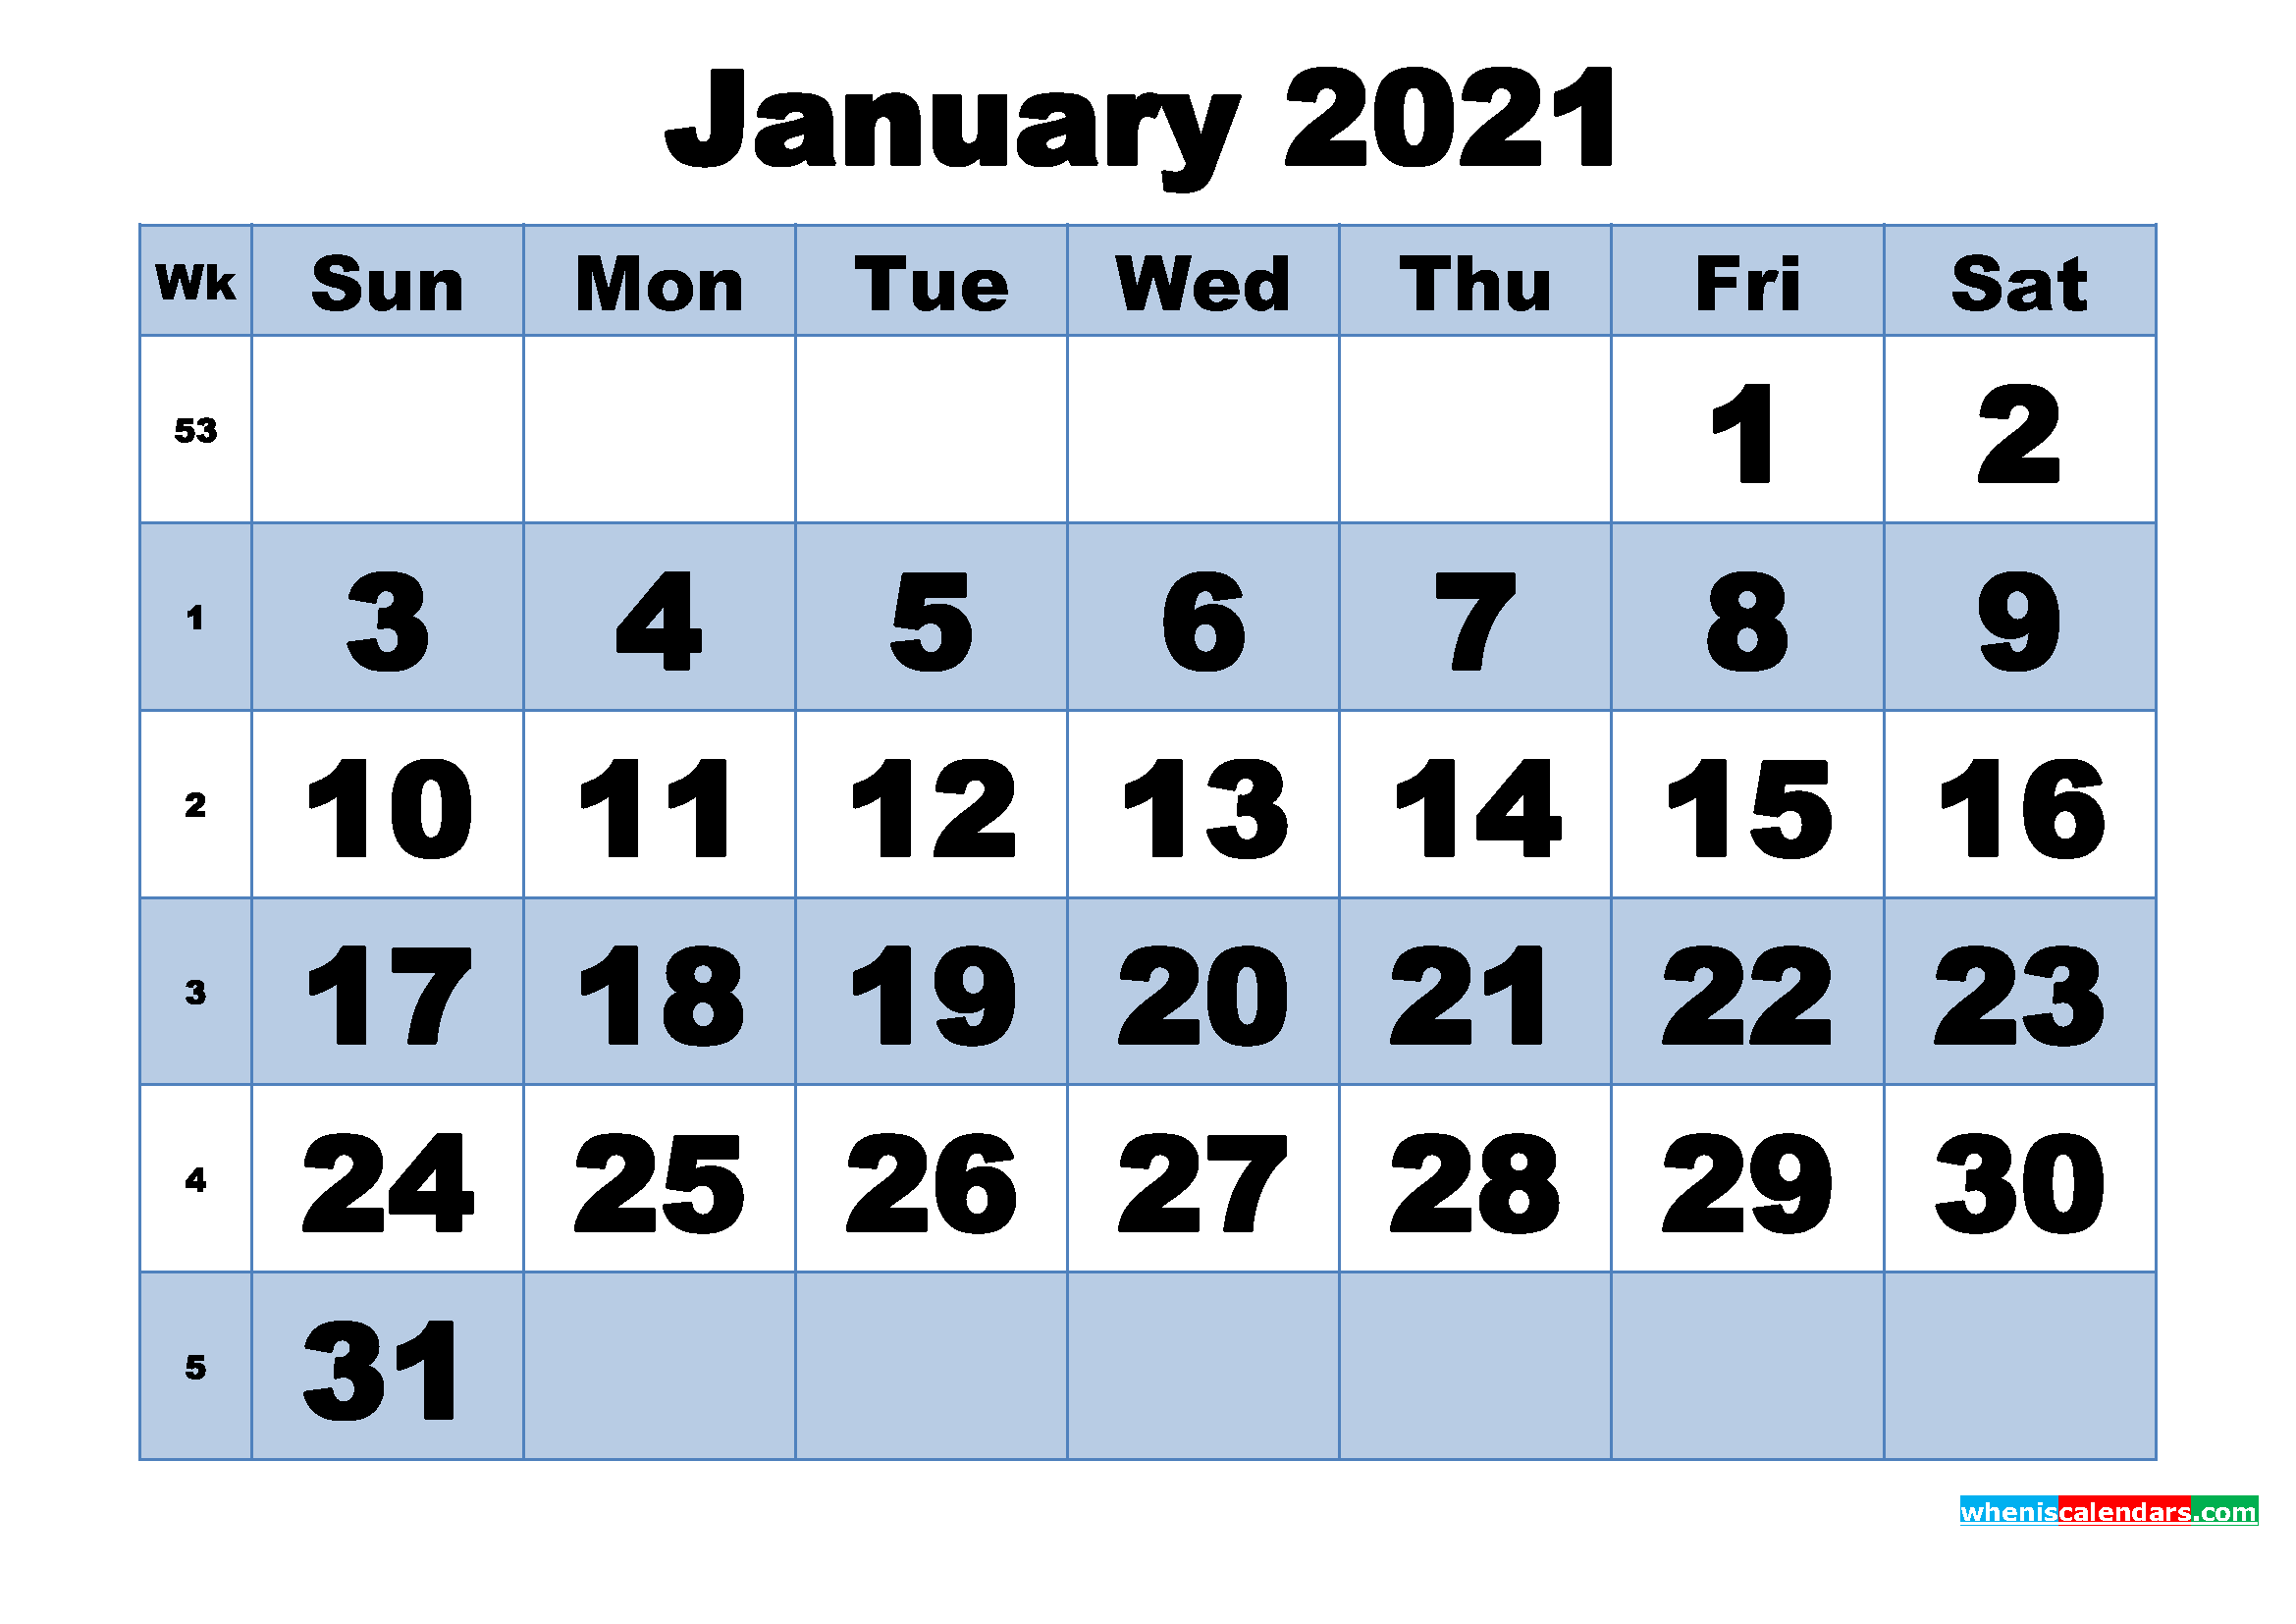 January 2021 Calendar Printable Free Monthly Collection Of January 2021 Photo Calendars With